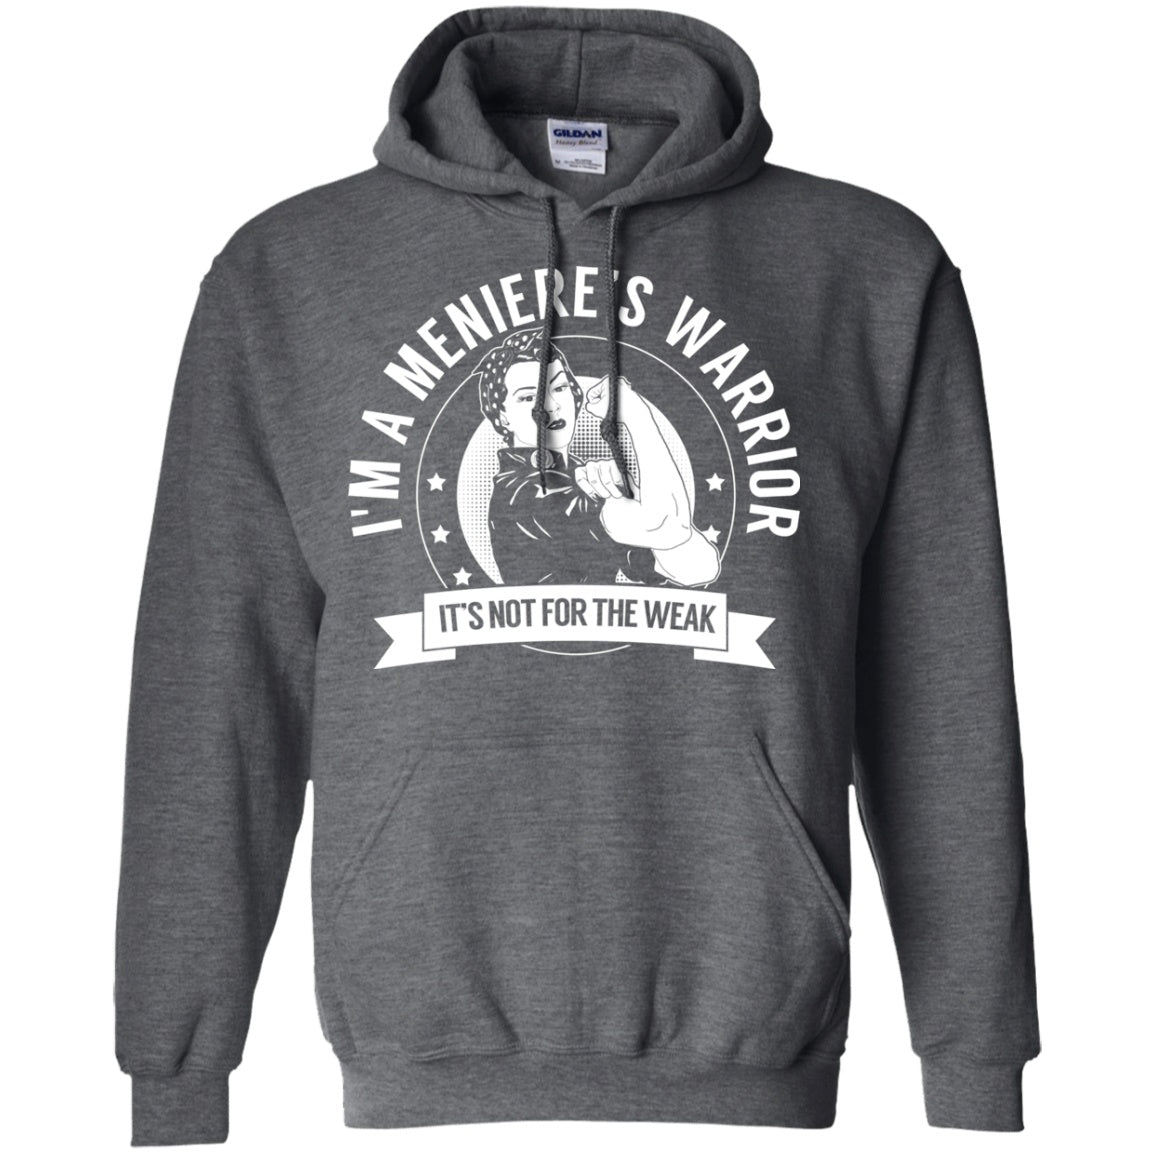 Meniere&#39;s Disease - Meniere’s Warrior NFTW Pullover Hoodie 8 oz. - The Unchargeables